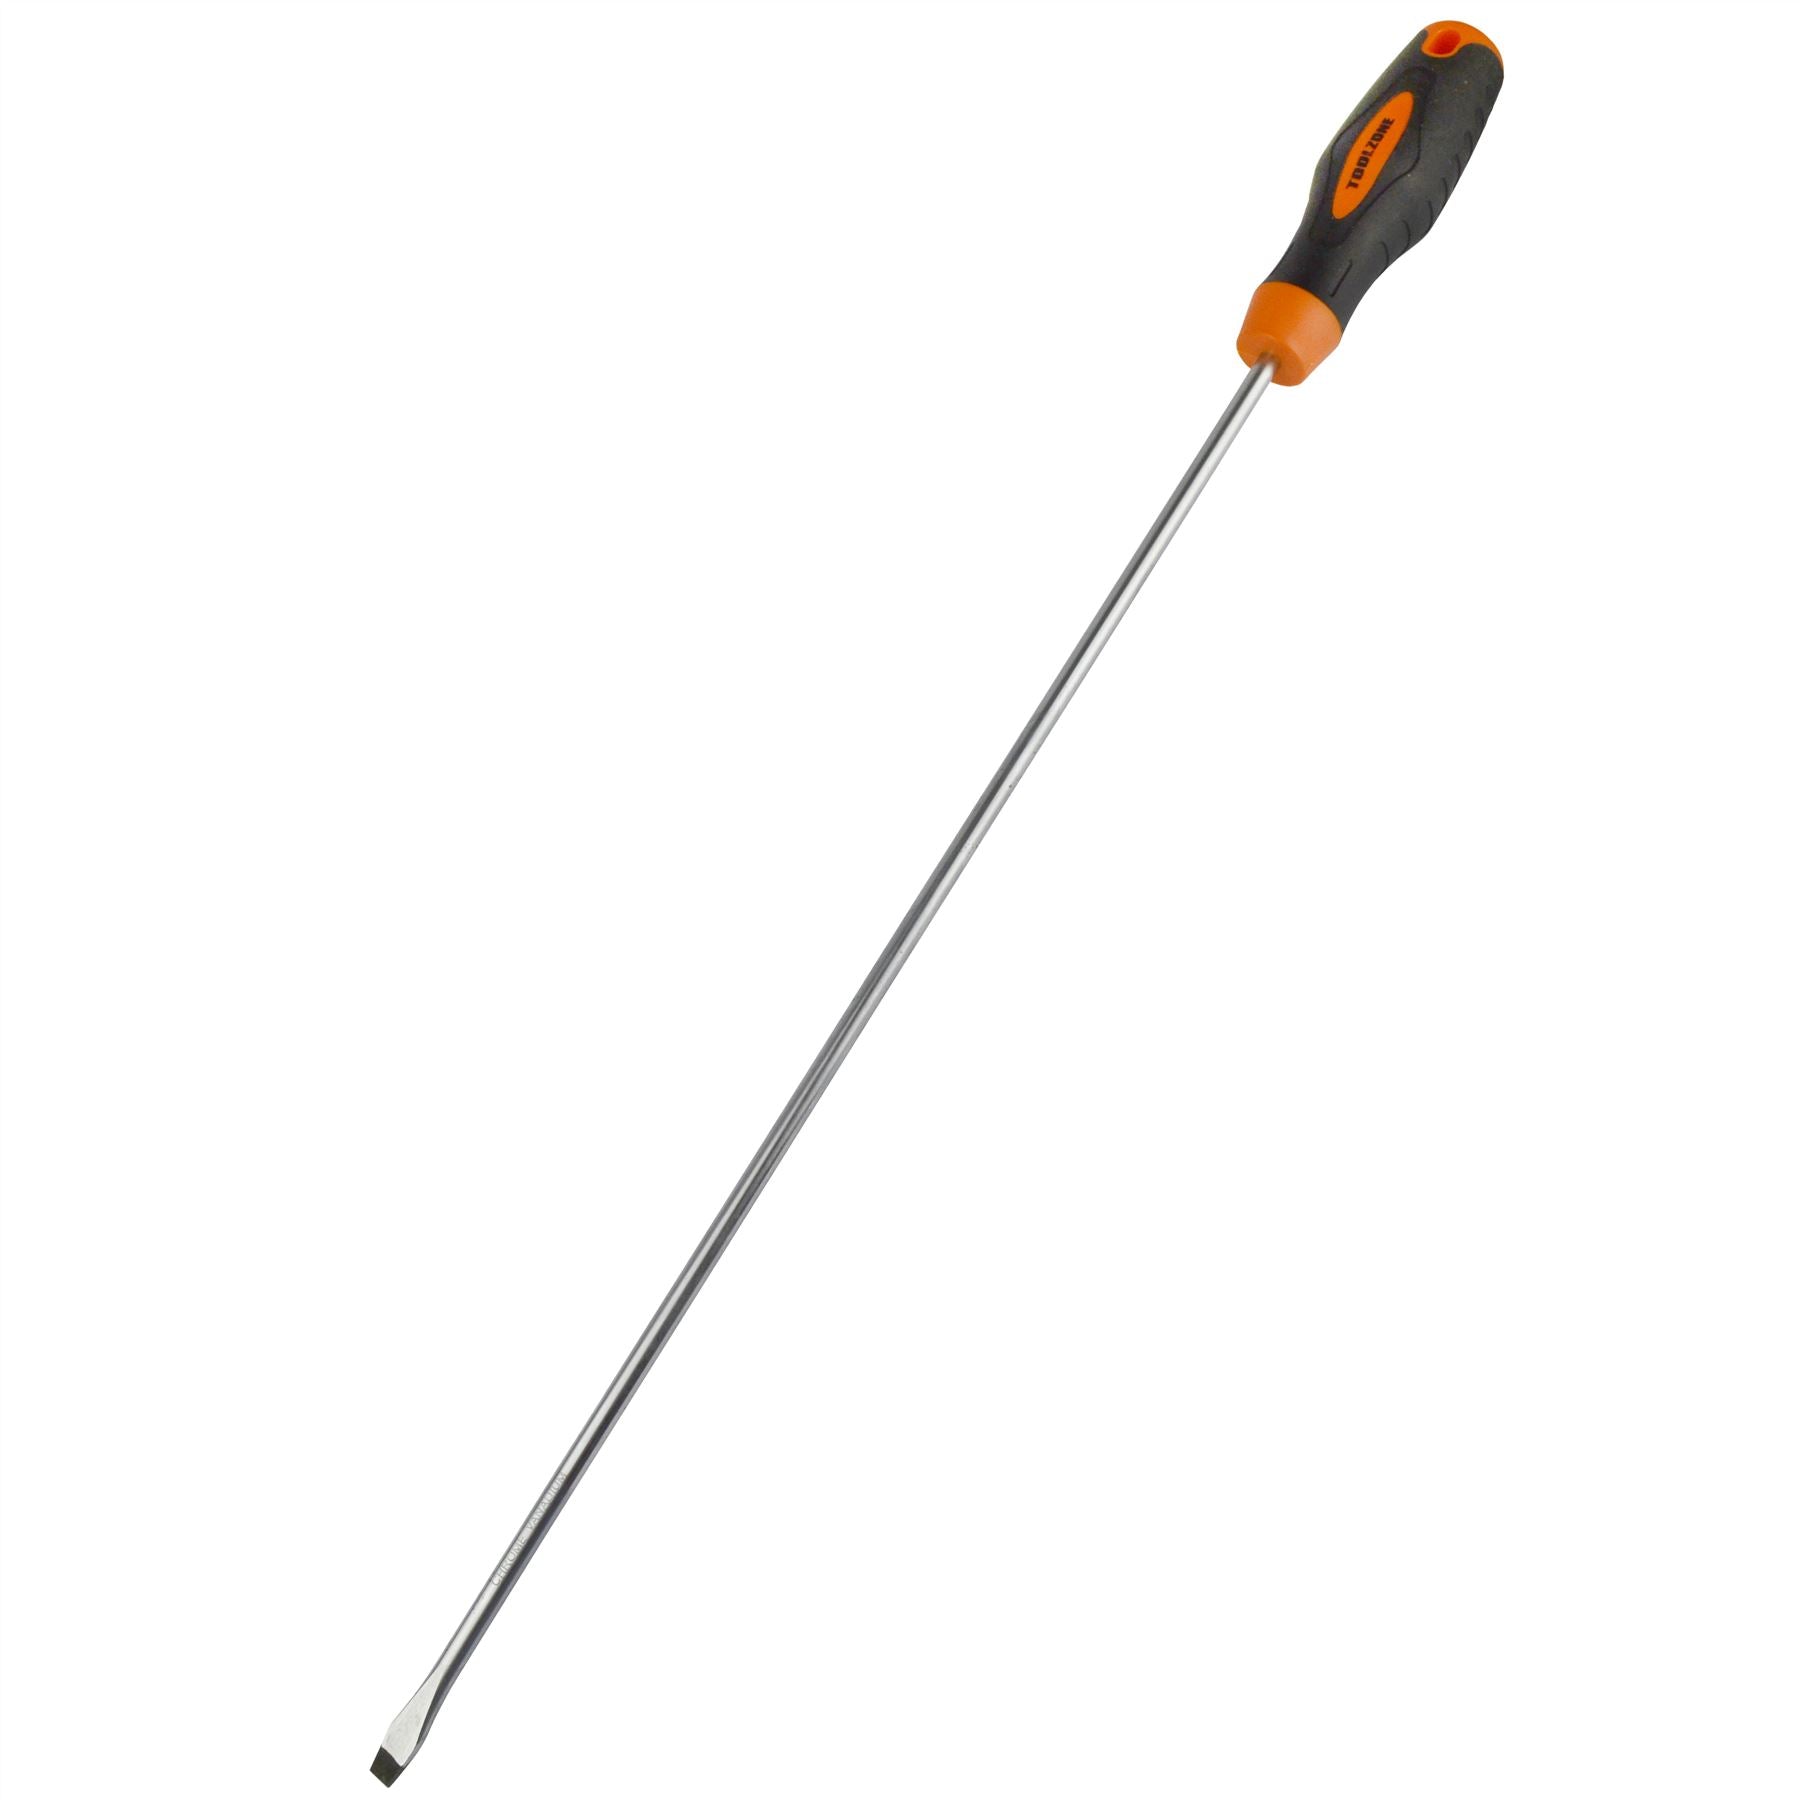 Flat Head Extra Long Screwdriver Total Length 400mm with Rubber Handle TE692